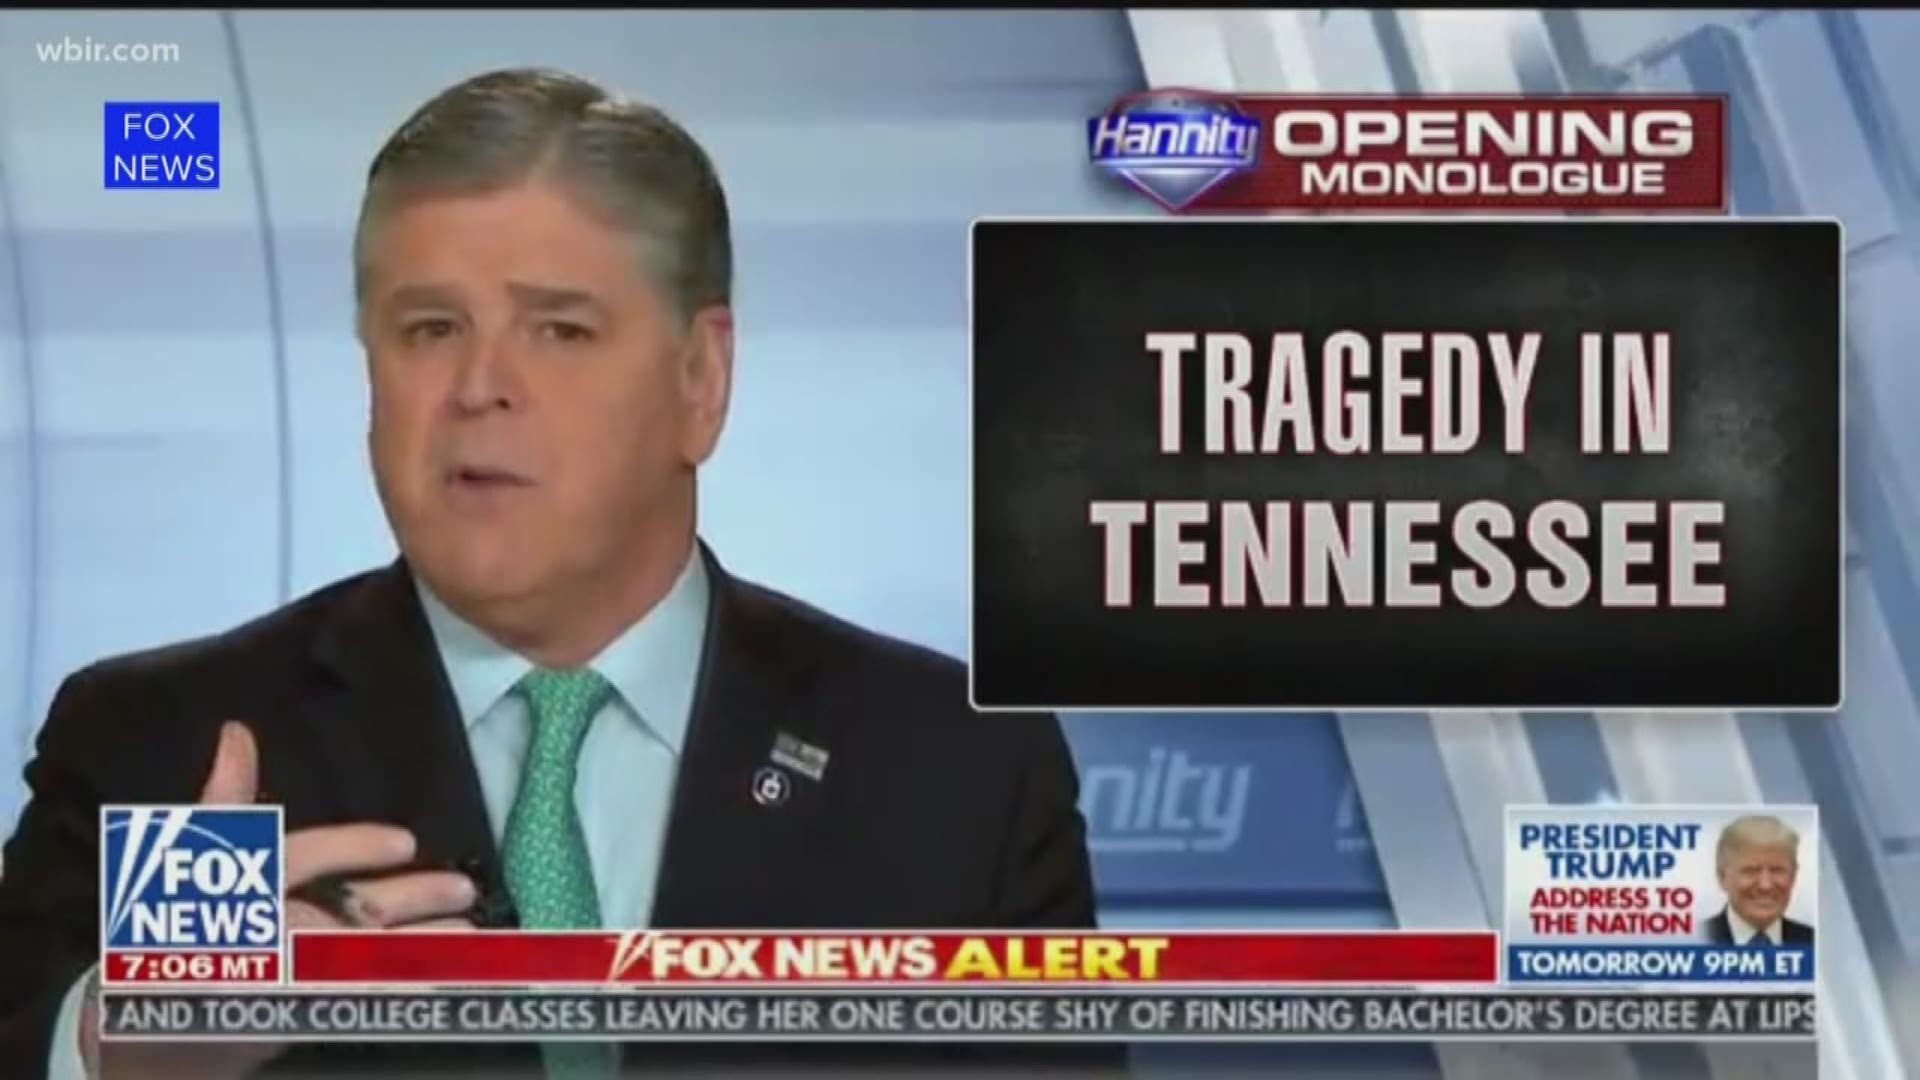 The parents of Pierce Corcoron appeared on Fox News with Sean Hannity, where Hannity claimed the driver that hit Corcoran was driving on the wrong side of the road. According to investigators and a witness, that is not true.